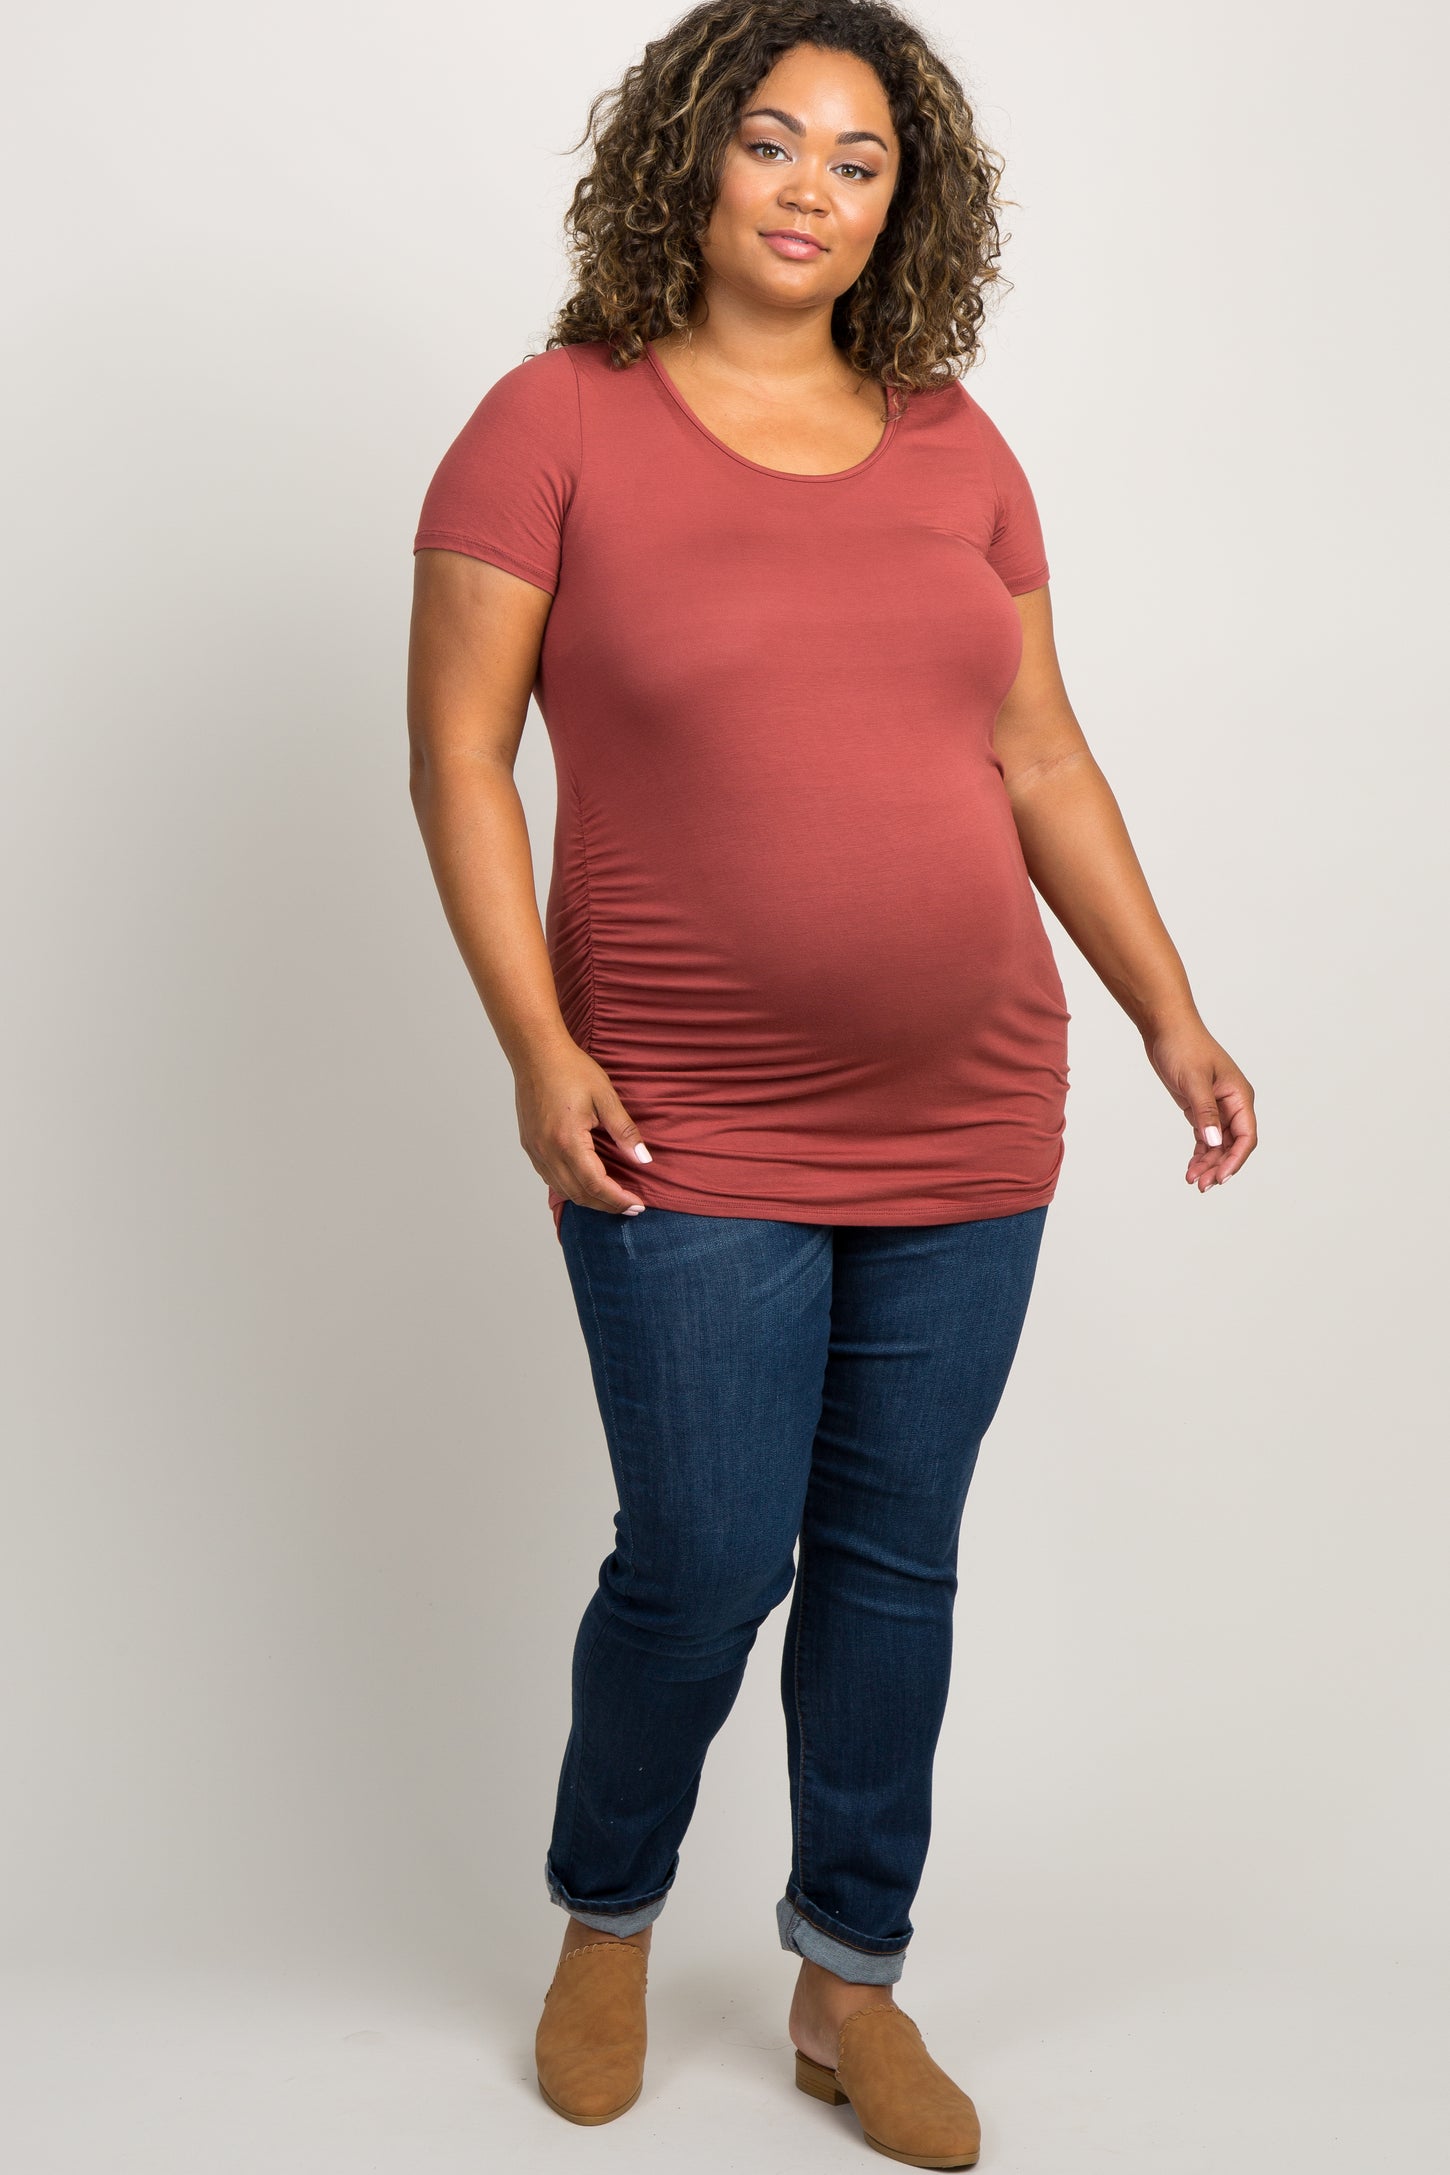 PinkBlush Navy Blue Solid Basic Plus Maternity Jeans